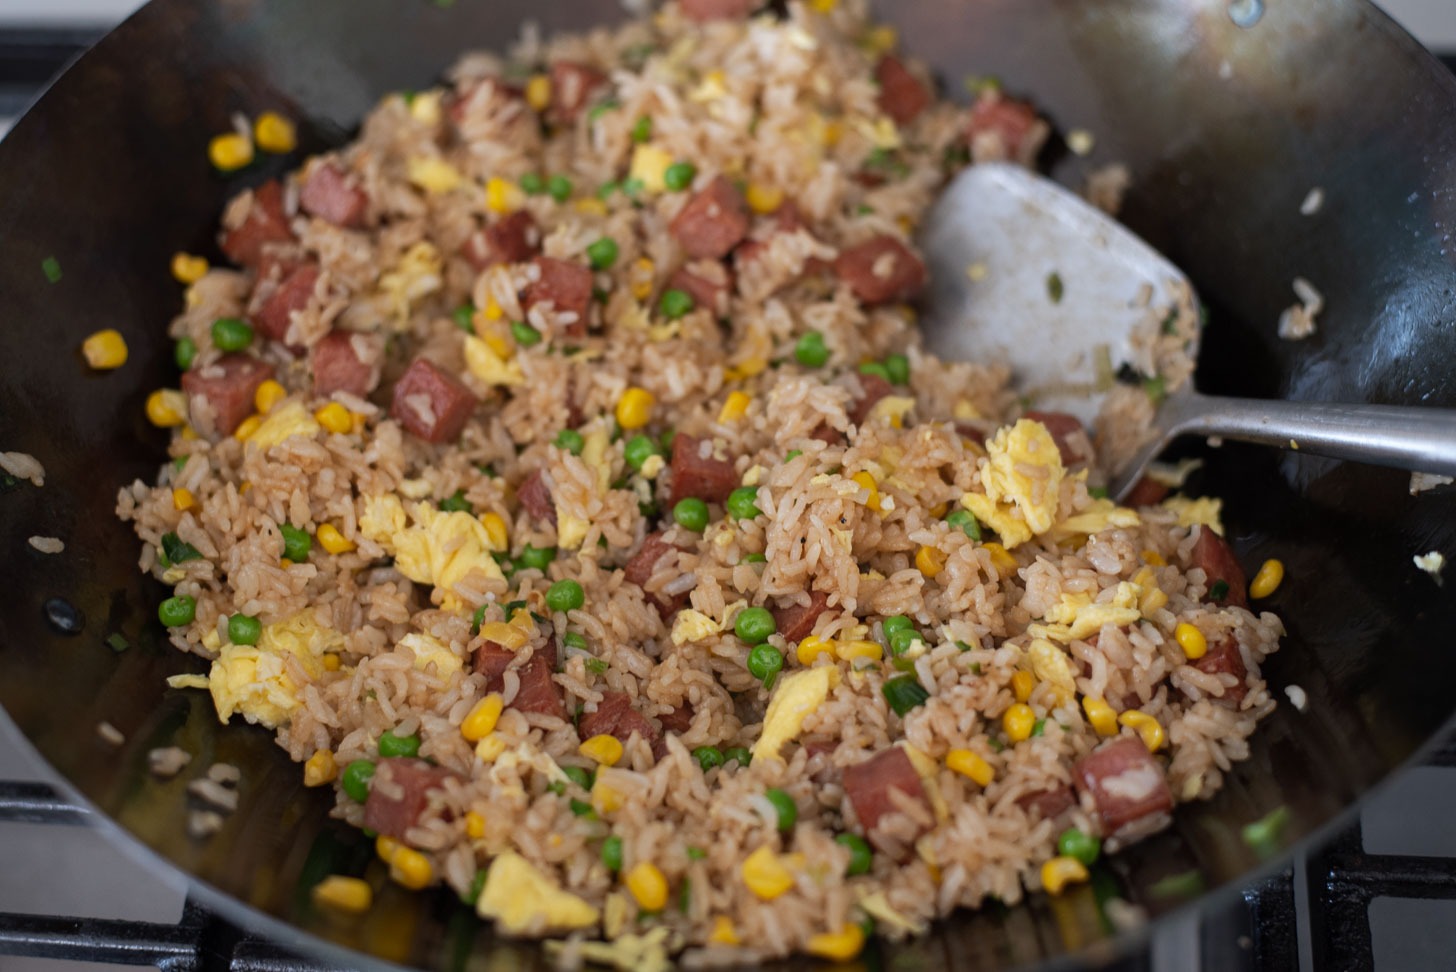 Scrambled eggs are added to Spam fried rice at the end of cooking.